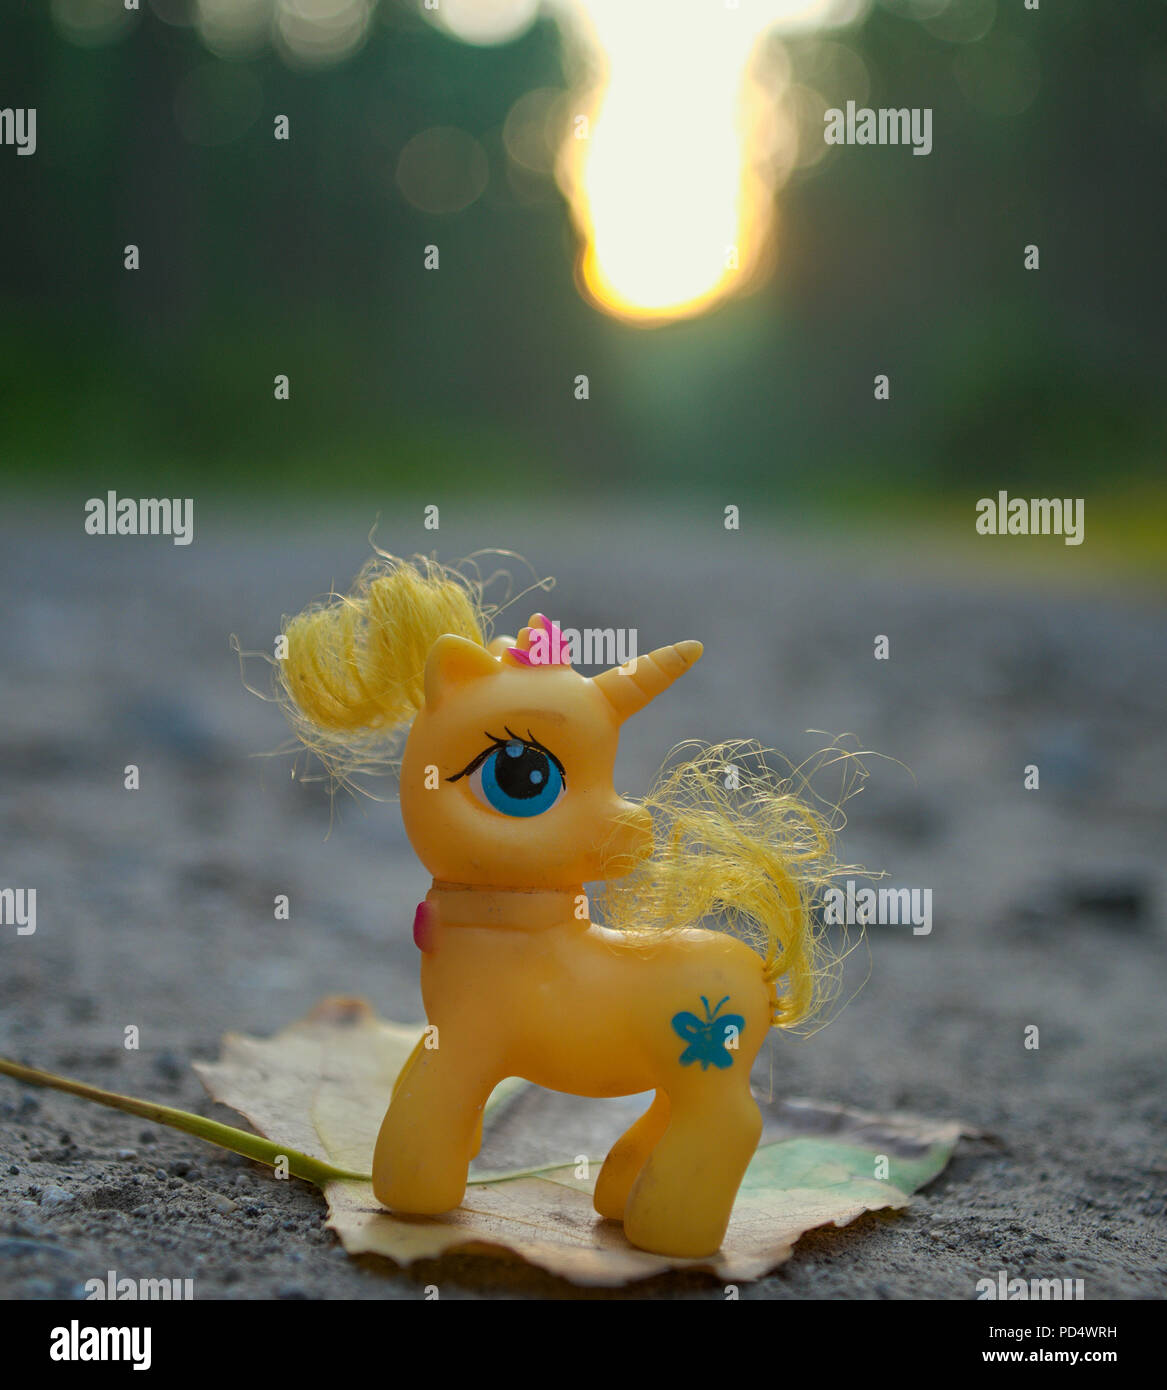 Yellow toy unicorn standing on leaf at forest road Stock Photo